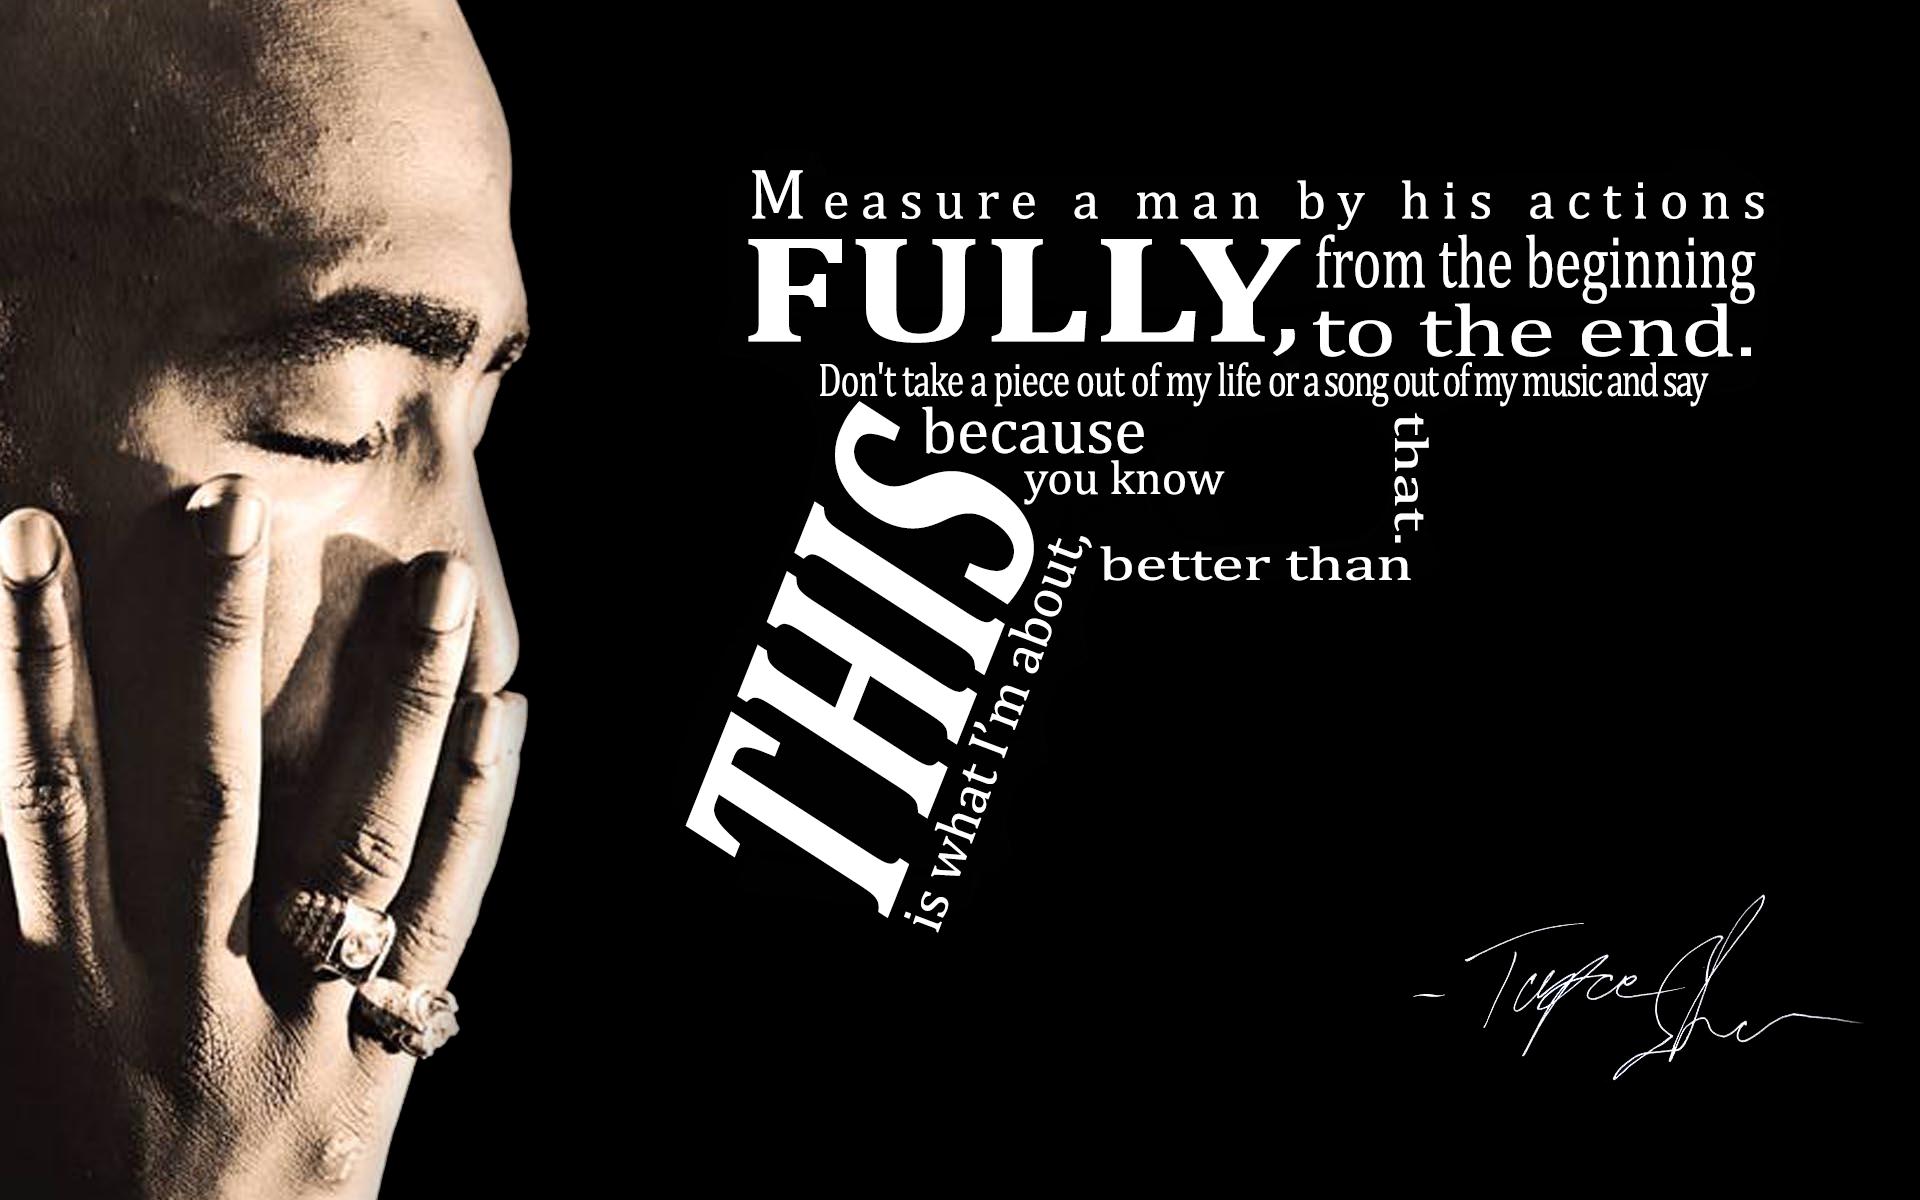 Measure a man by his actions fully - Tupac Shakur 1920x1200 x